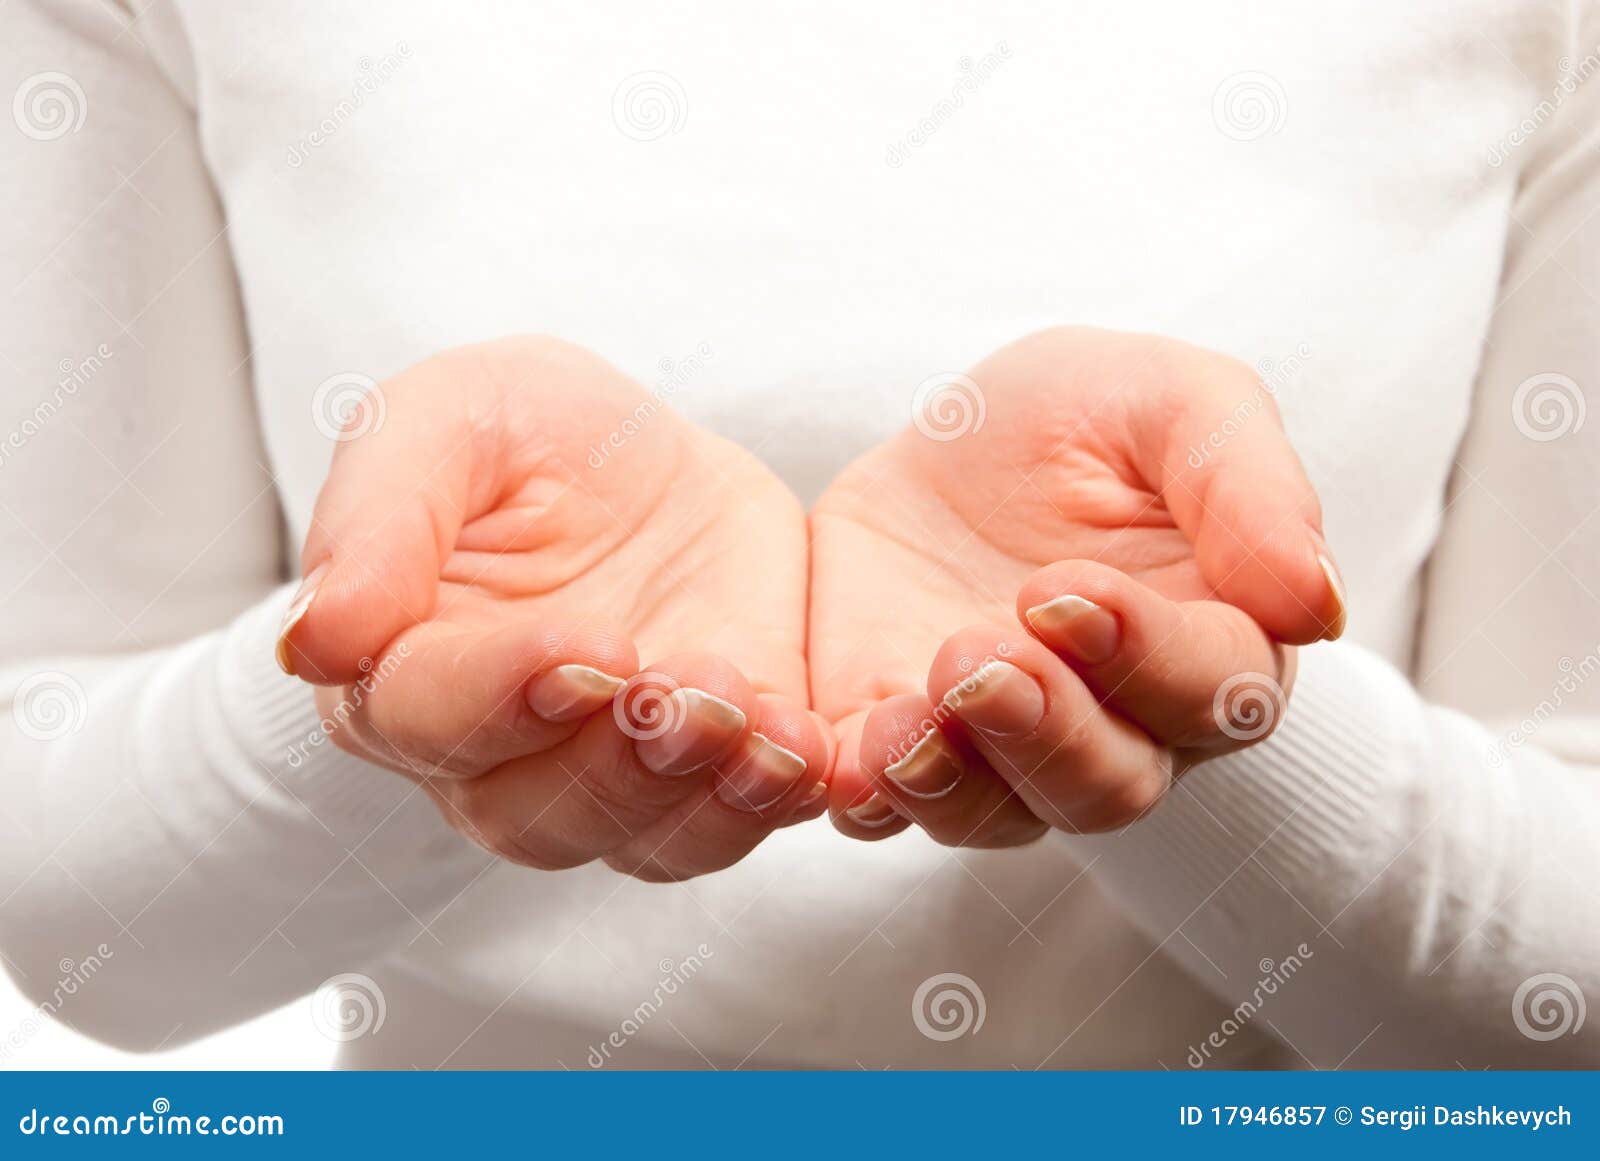 Woman s cupped hands stock image. Image of beauty, motivation - 17946857